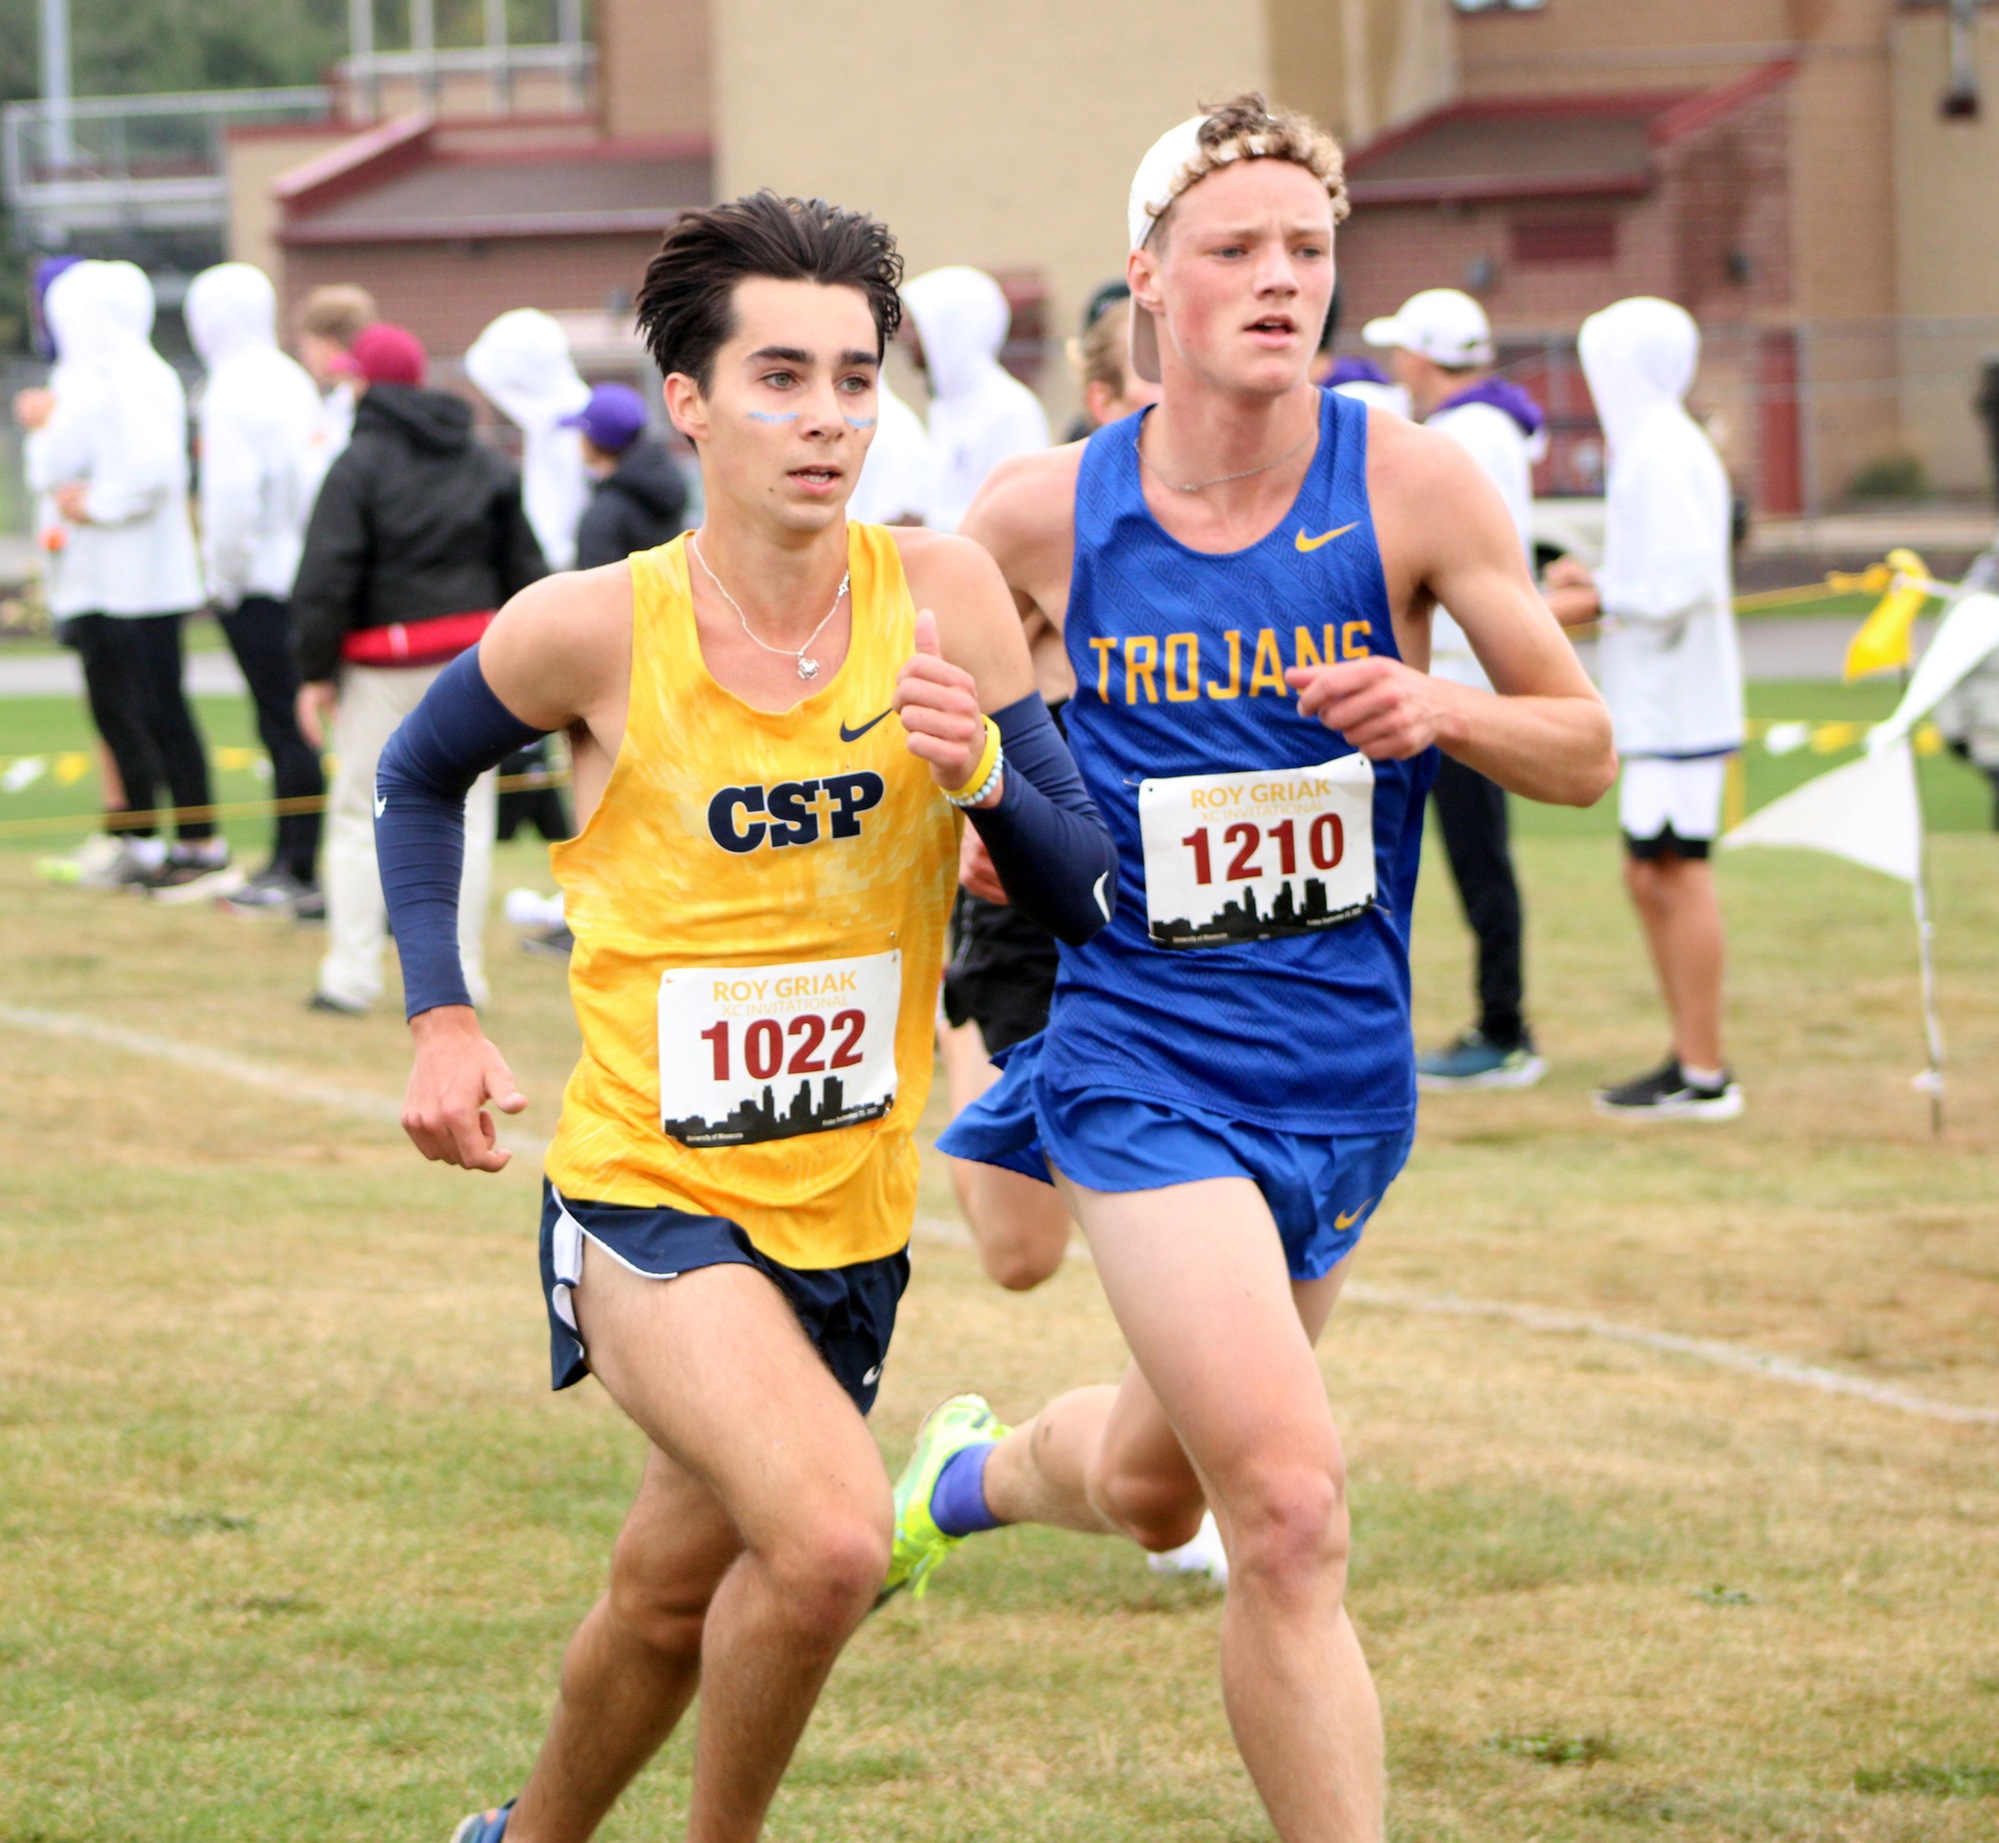 NIACC freshman Bryson Canton placed 123rd Friday in the 8K Maroon Race at the Griak Invitational.